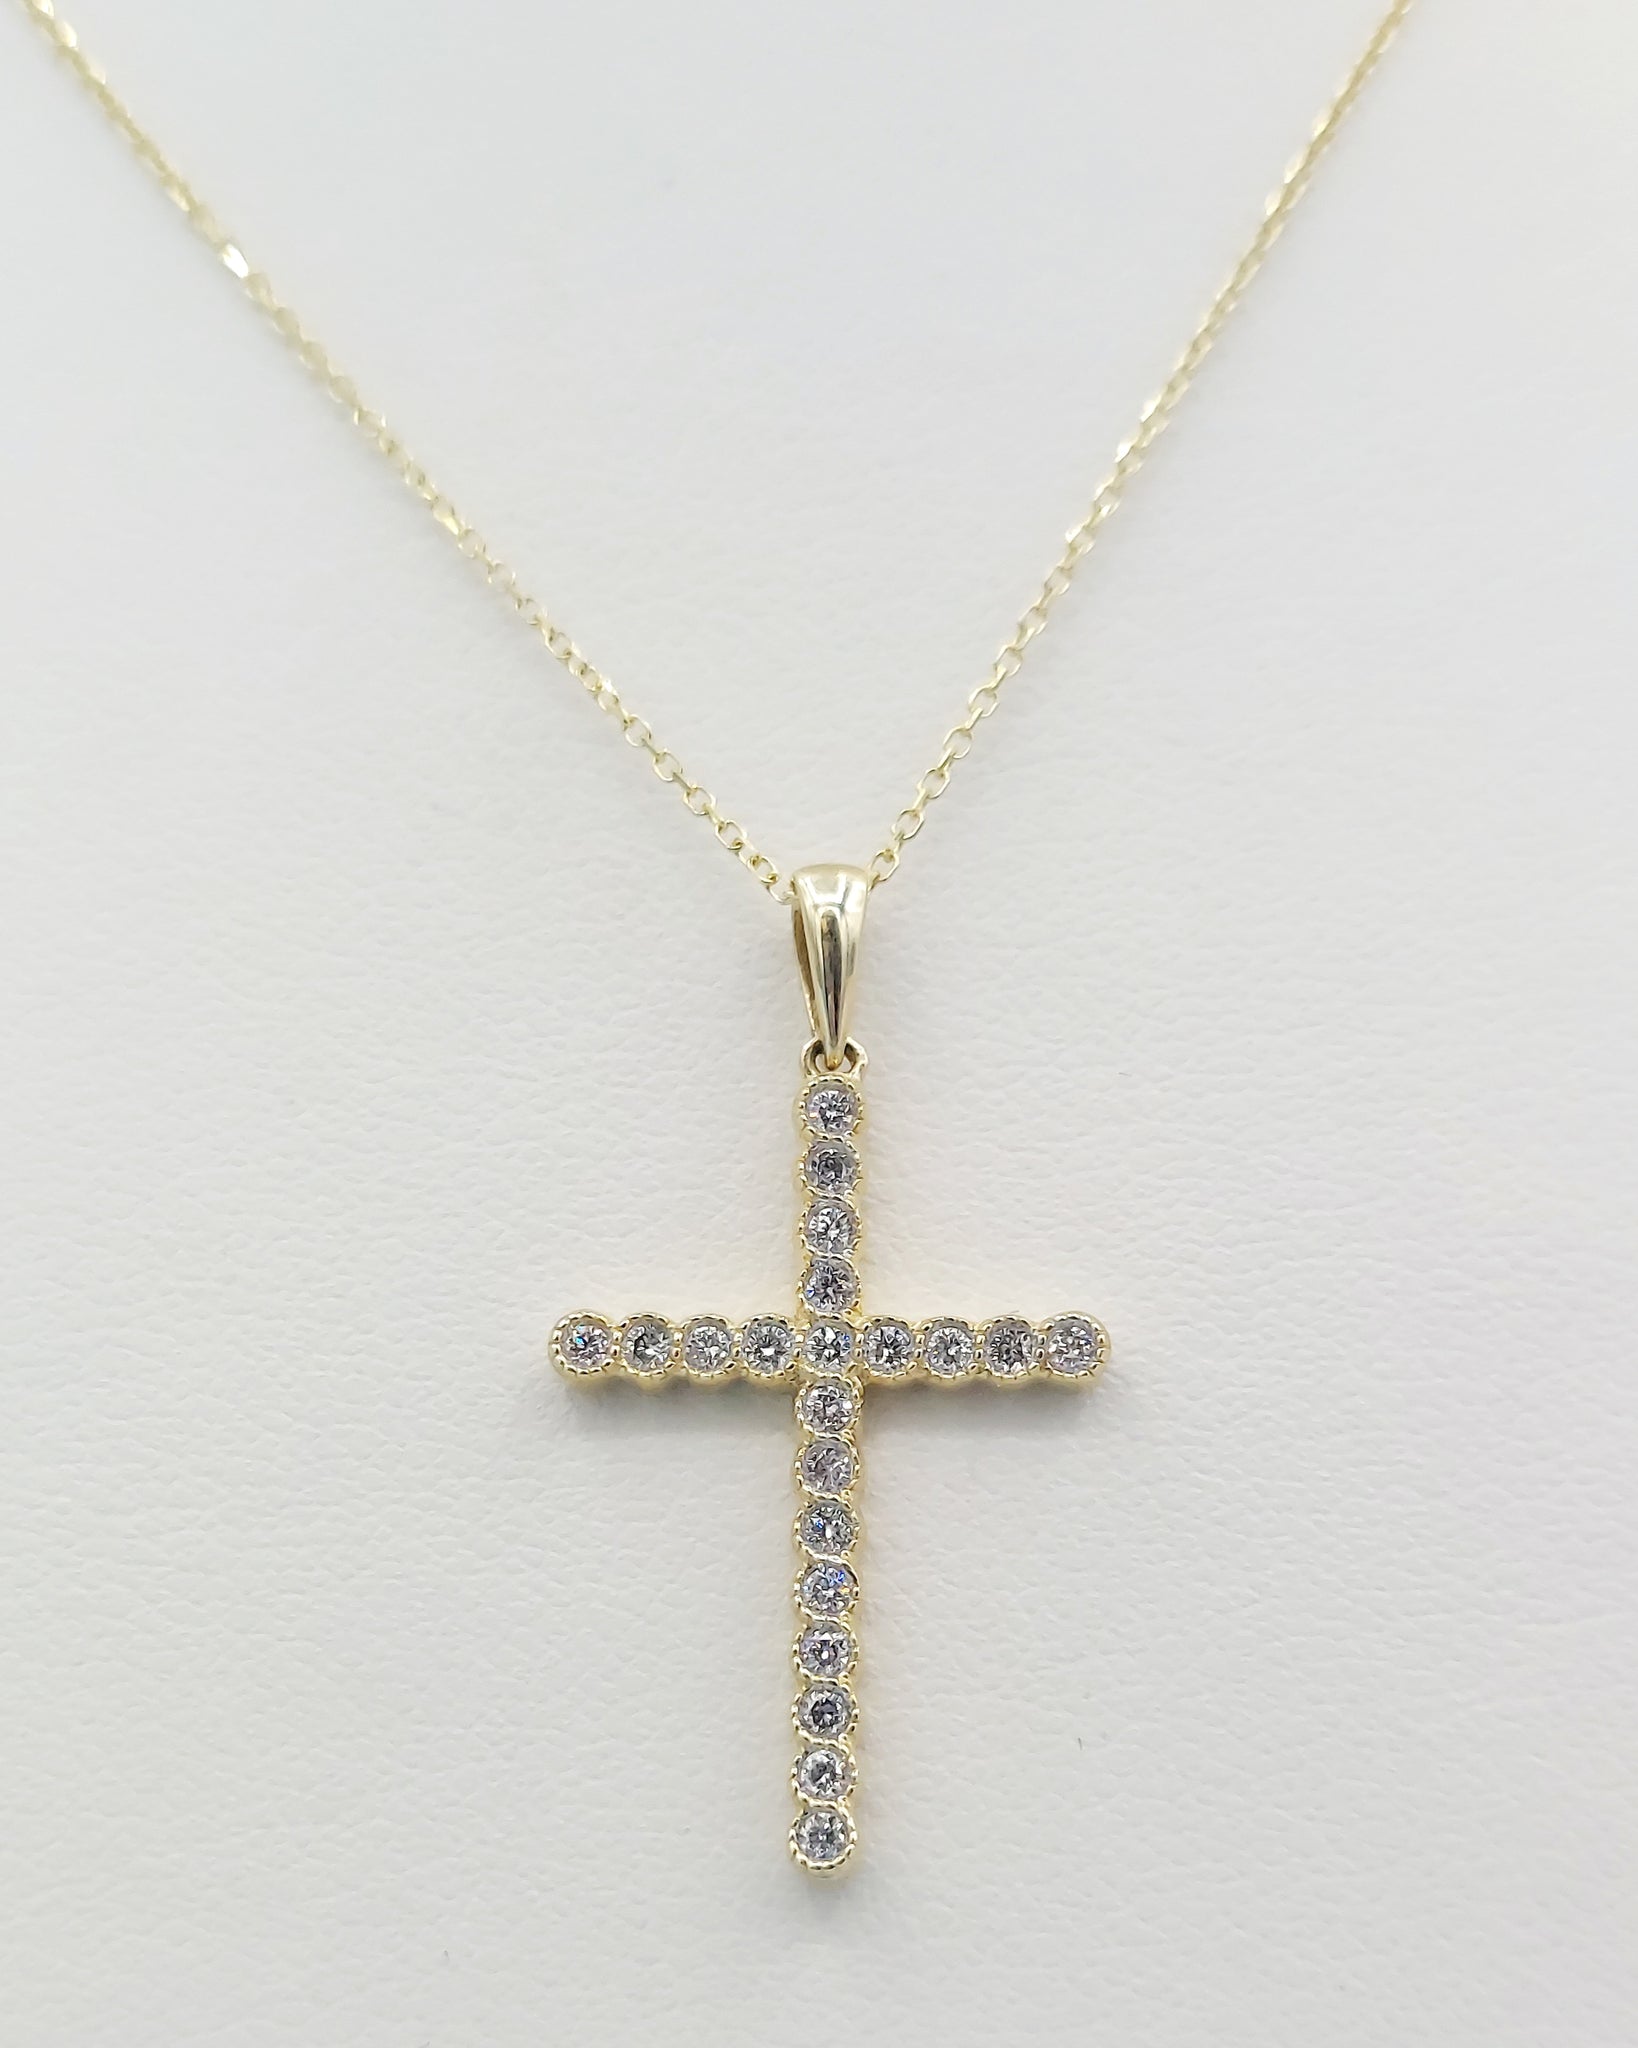 Diamond Cross Necklace, 14K Solid Yellow Gold Diamond Cross Necklace, Small Diamond  Cross Pendant, Minimalist Cross Necklace, Baptism Gift - Etsy